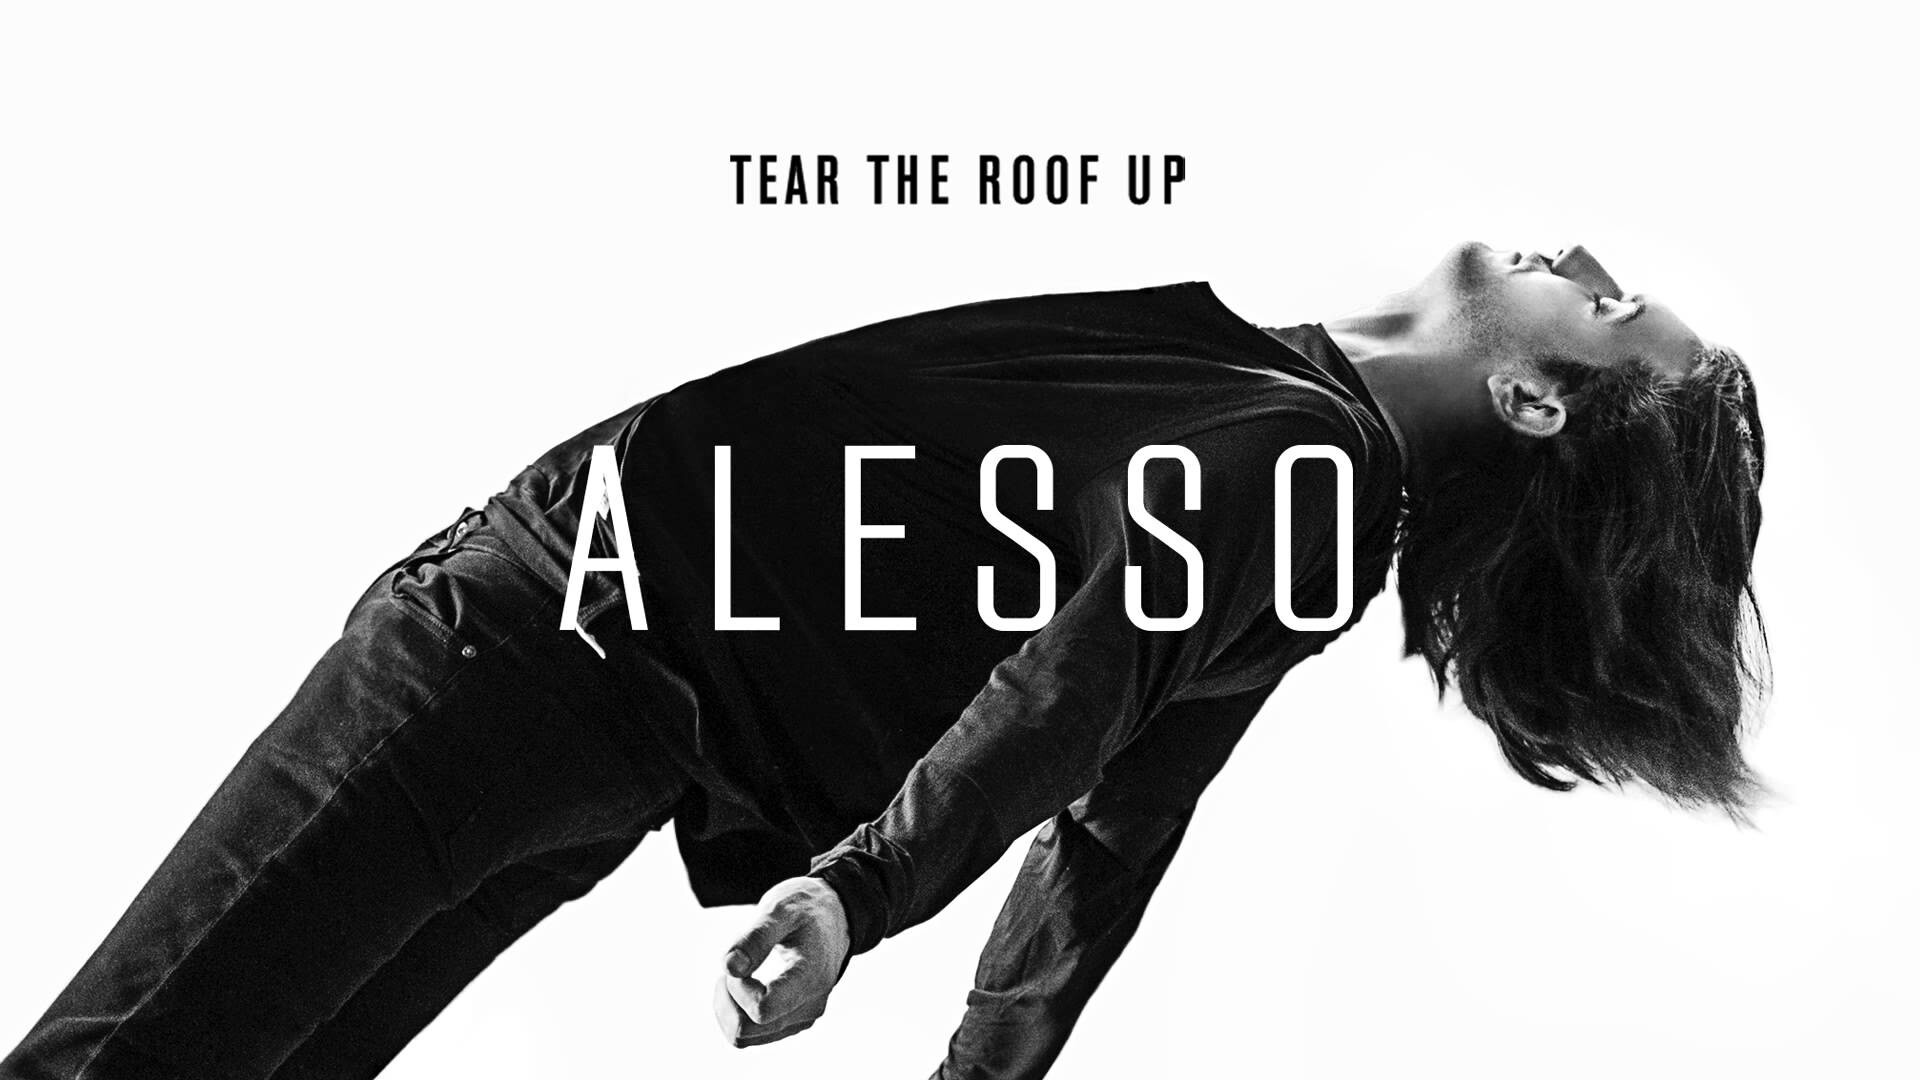 Alesso: He debuted a new track called "Tear the Roof Up" in 2014. 1920x1080 Full HD Background.